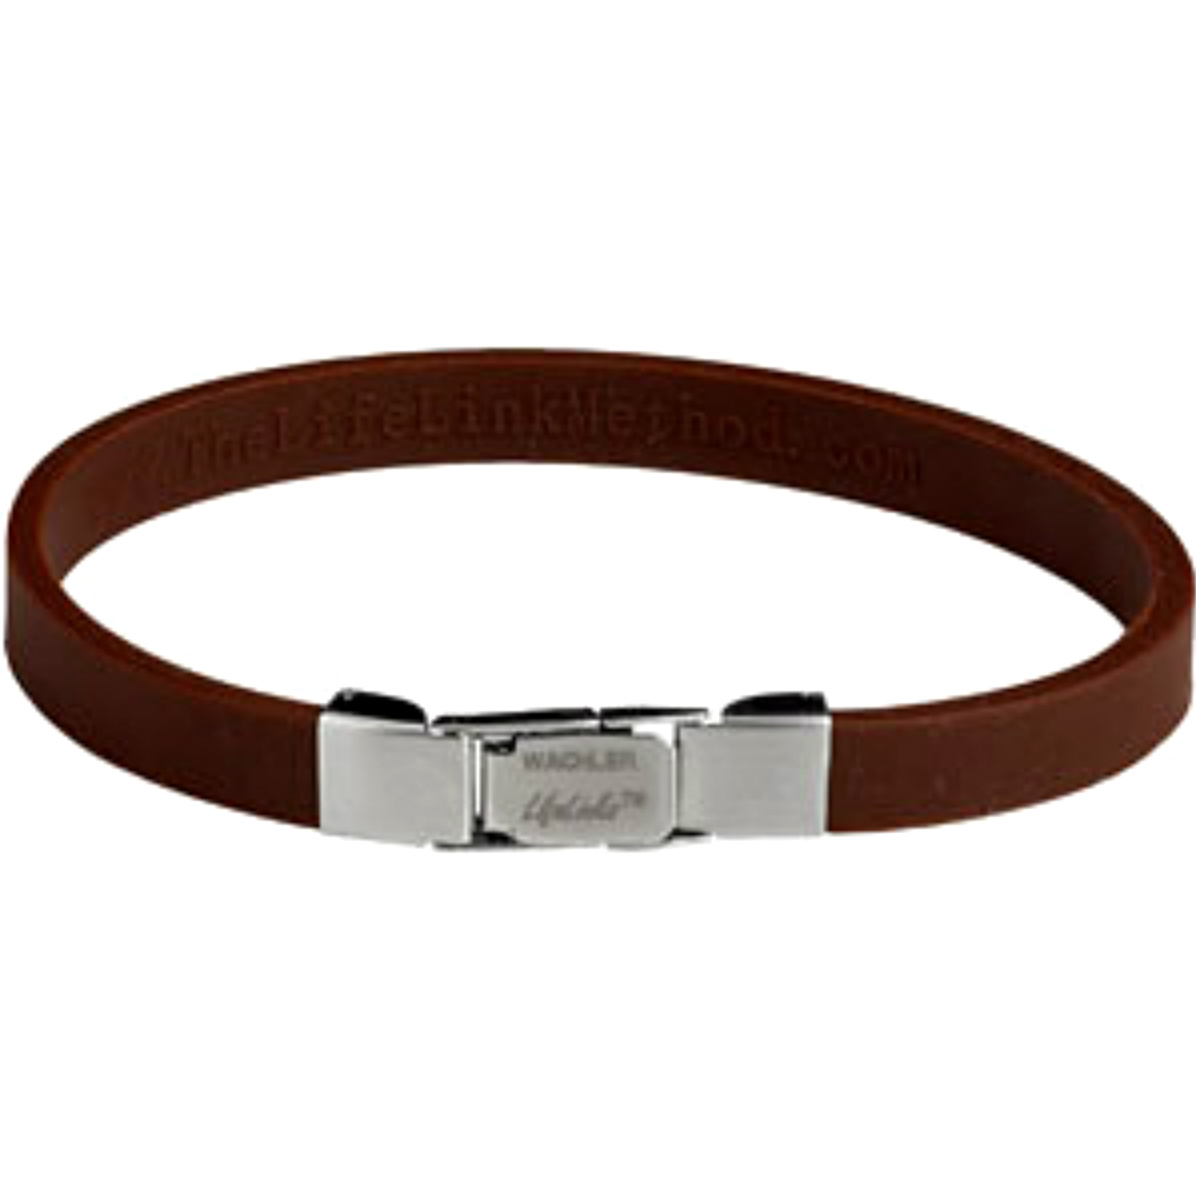 LifeLink Brown Rubber Bracelet with Clasp